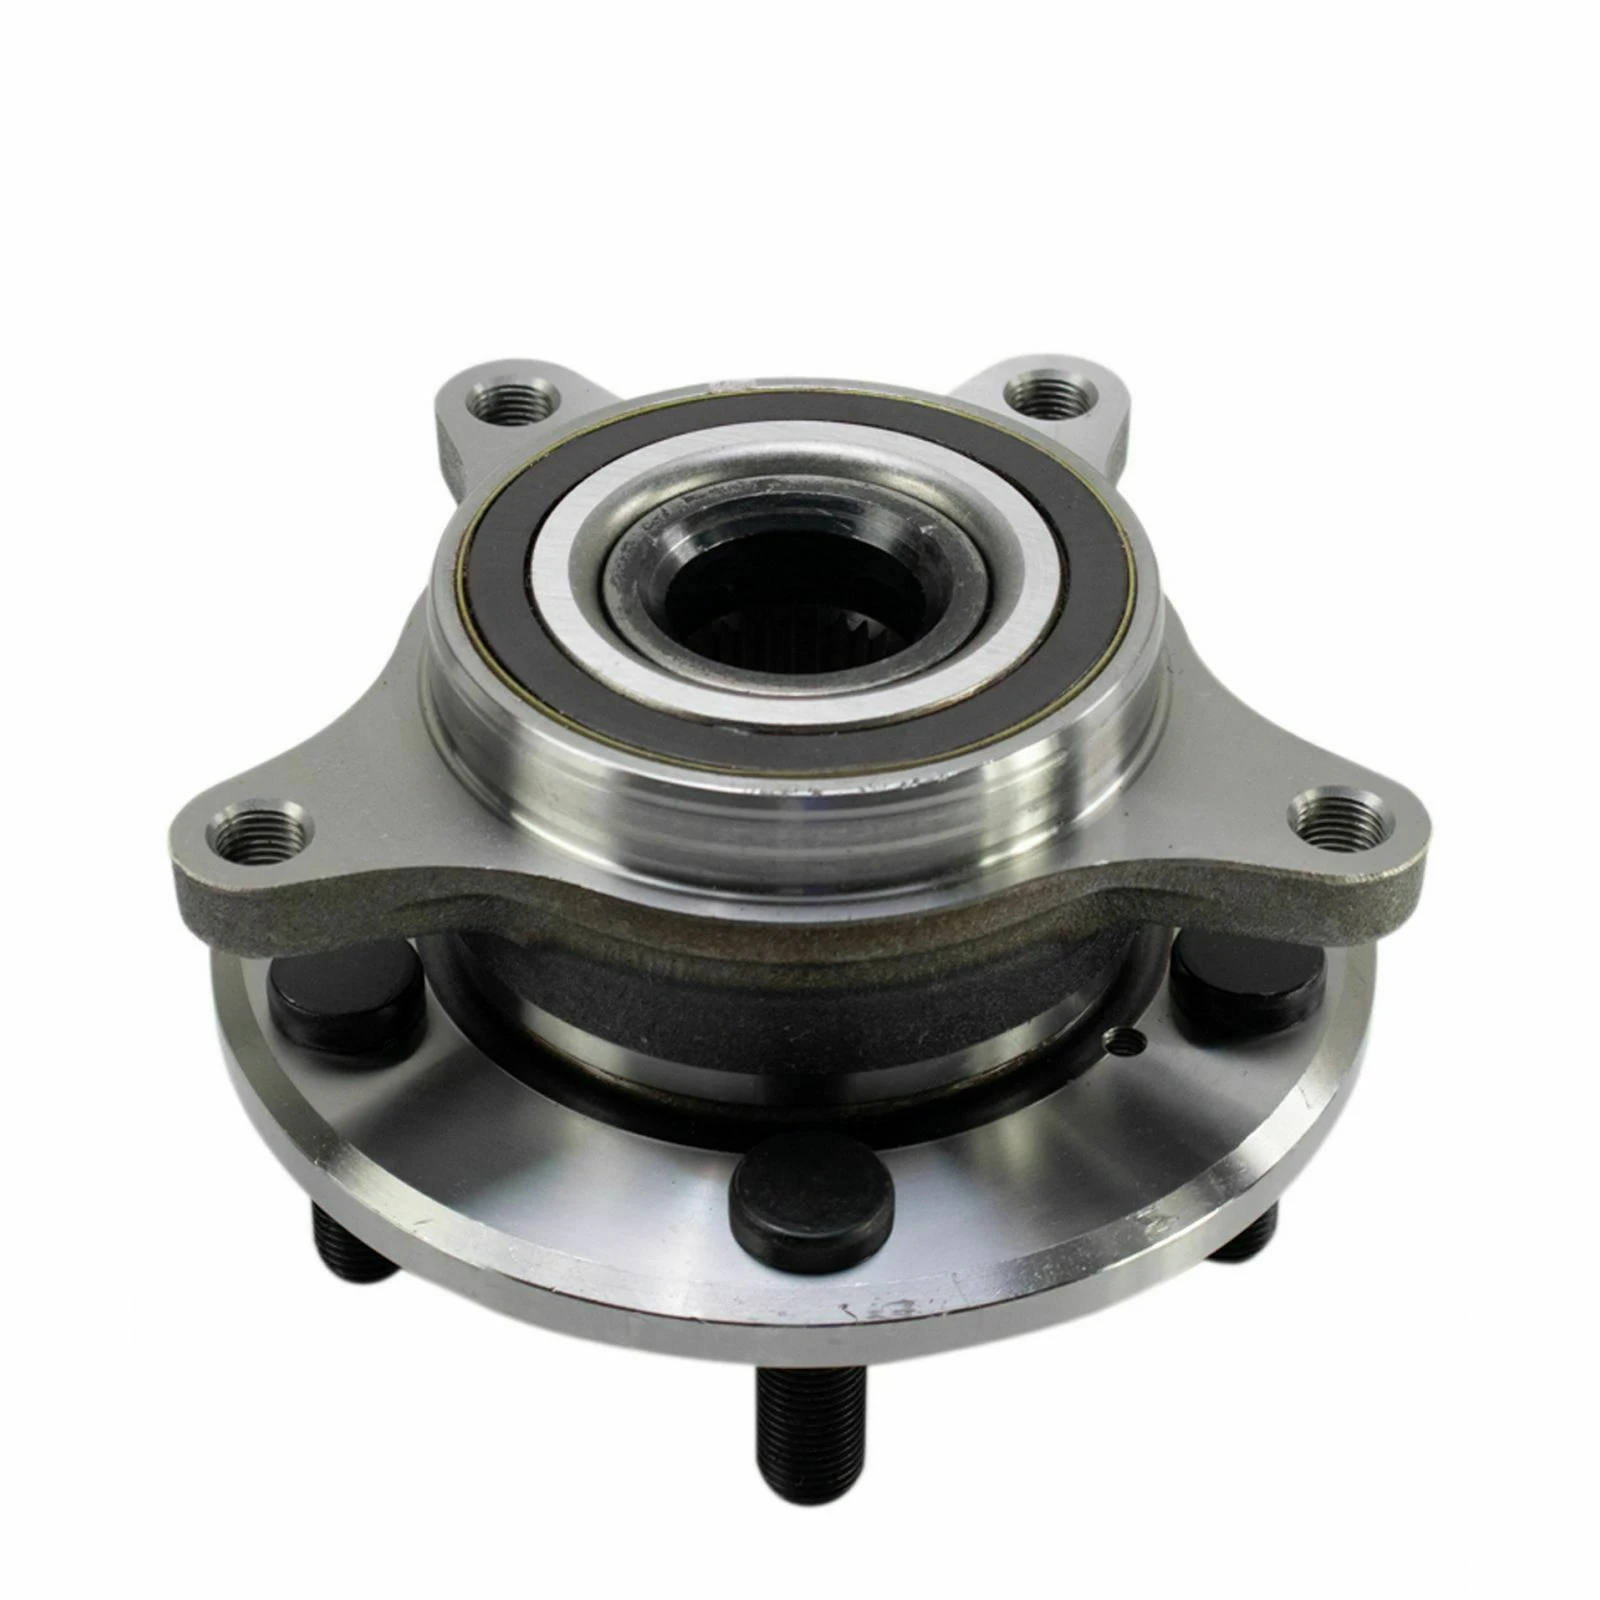 Civic- Type-r Front Wheel Hub Bearing 44200-tgh-a11 Rear 42200-tgh-a01  44300-tba-a01 - Buy Civic- Wheel Hub Bearing,Civic- Wheel Hub  Assembly,Civic- Hub Bearing With Abs Sensor Product on Alibaba.com